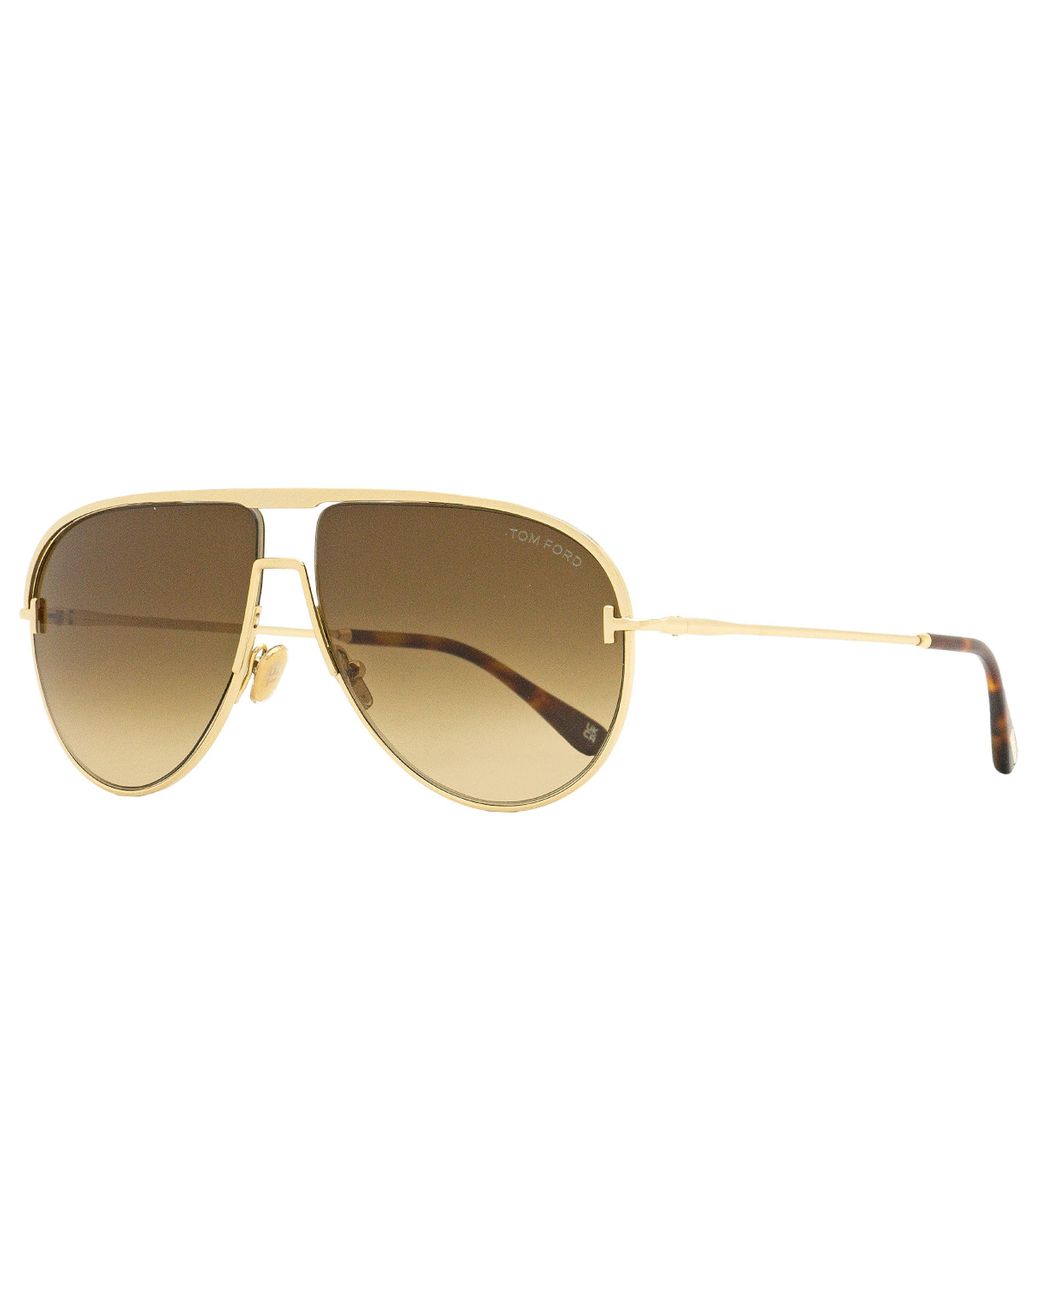 Tom Ford Aviator Sunglasses Tf924 Theo Gold 60mm in Black | Lyst